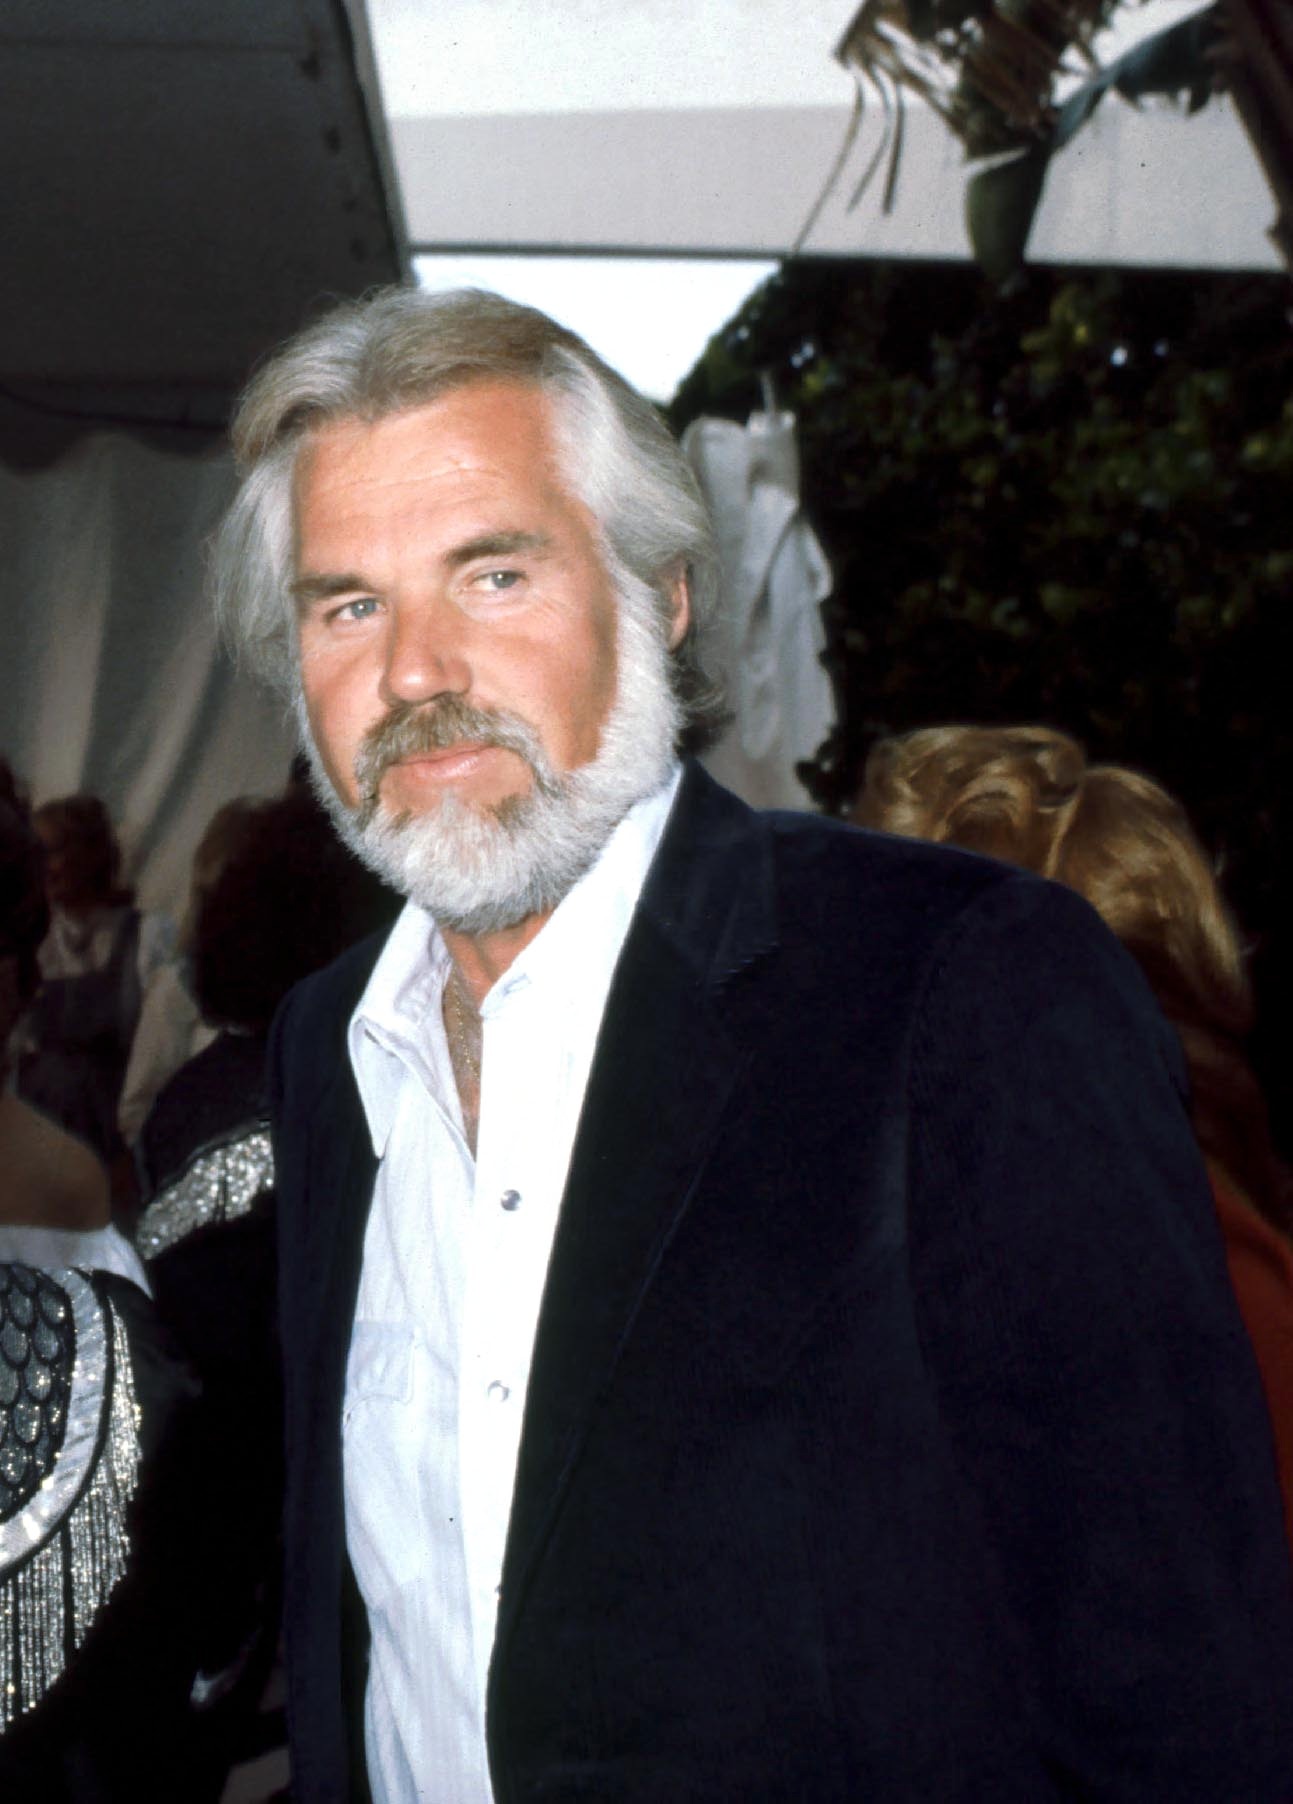 you tube kenny rogers through the years